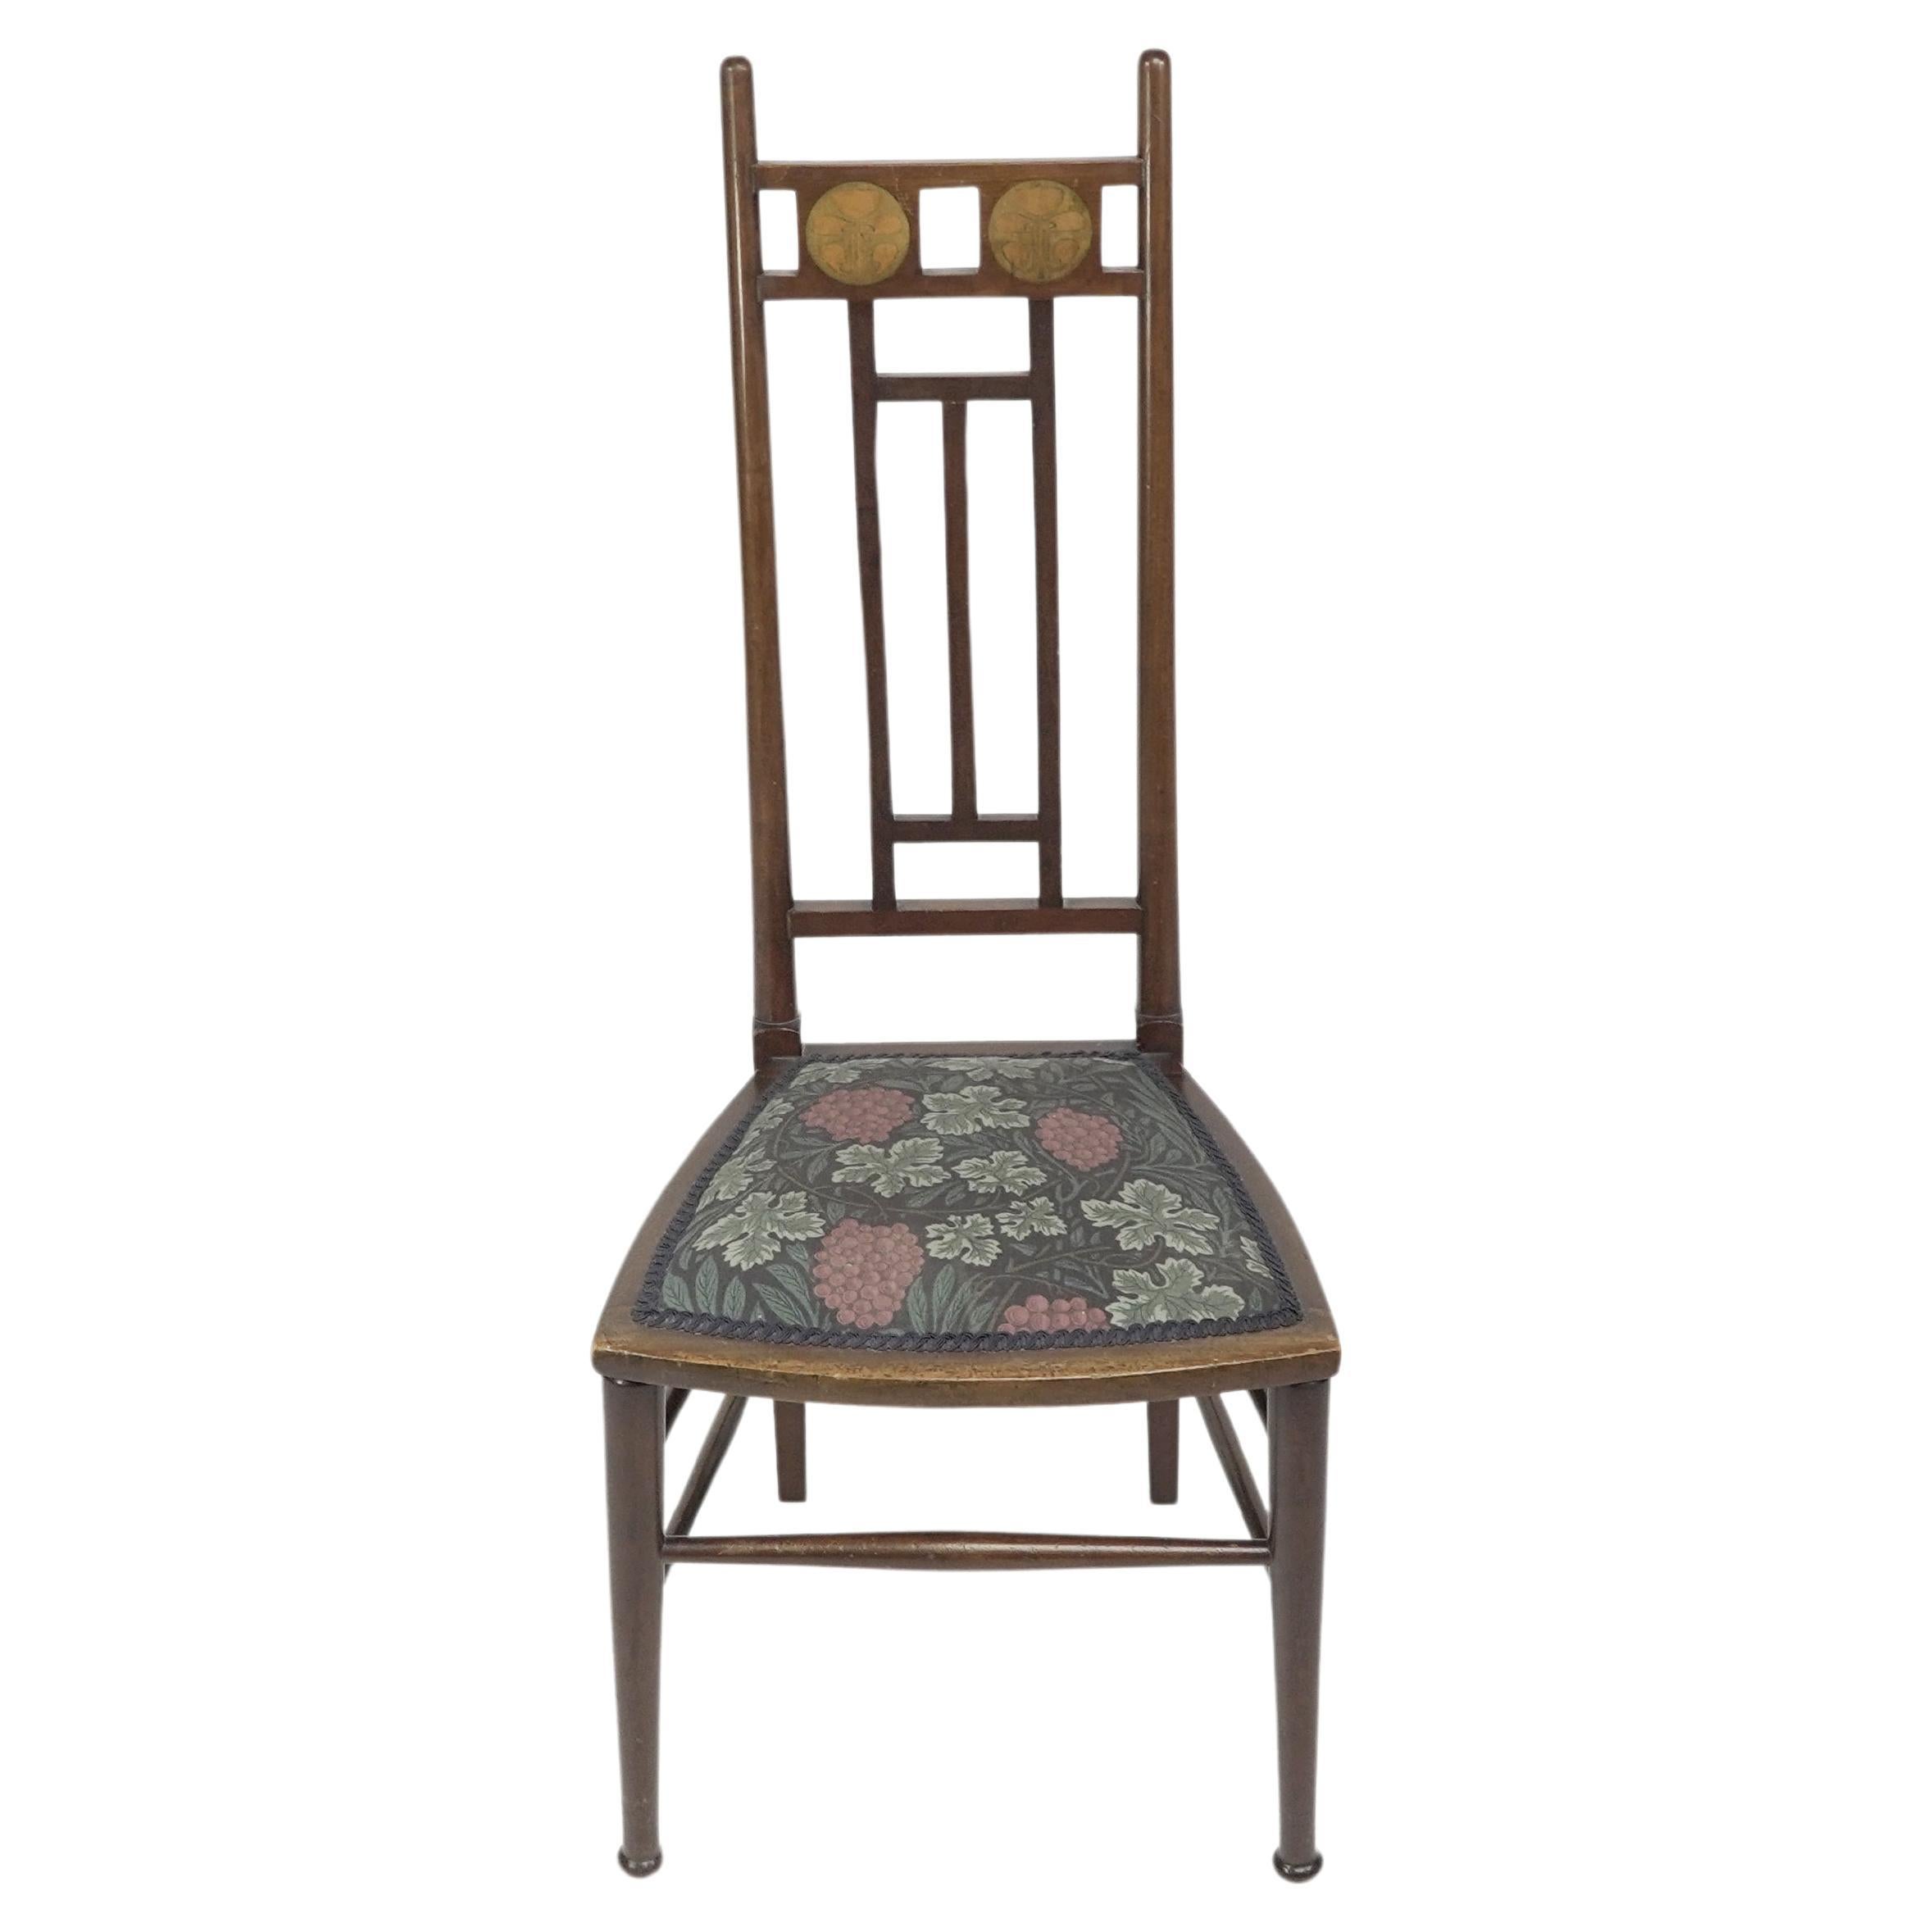 E G Punnett for Liberty & Co. A Walnut side chair with inlaid floral decoration. For Sale